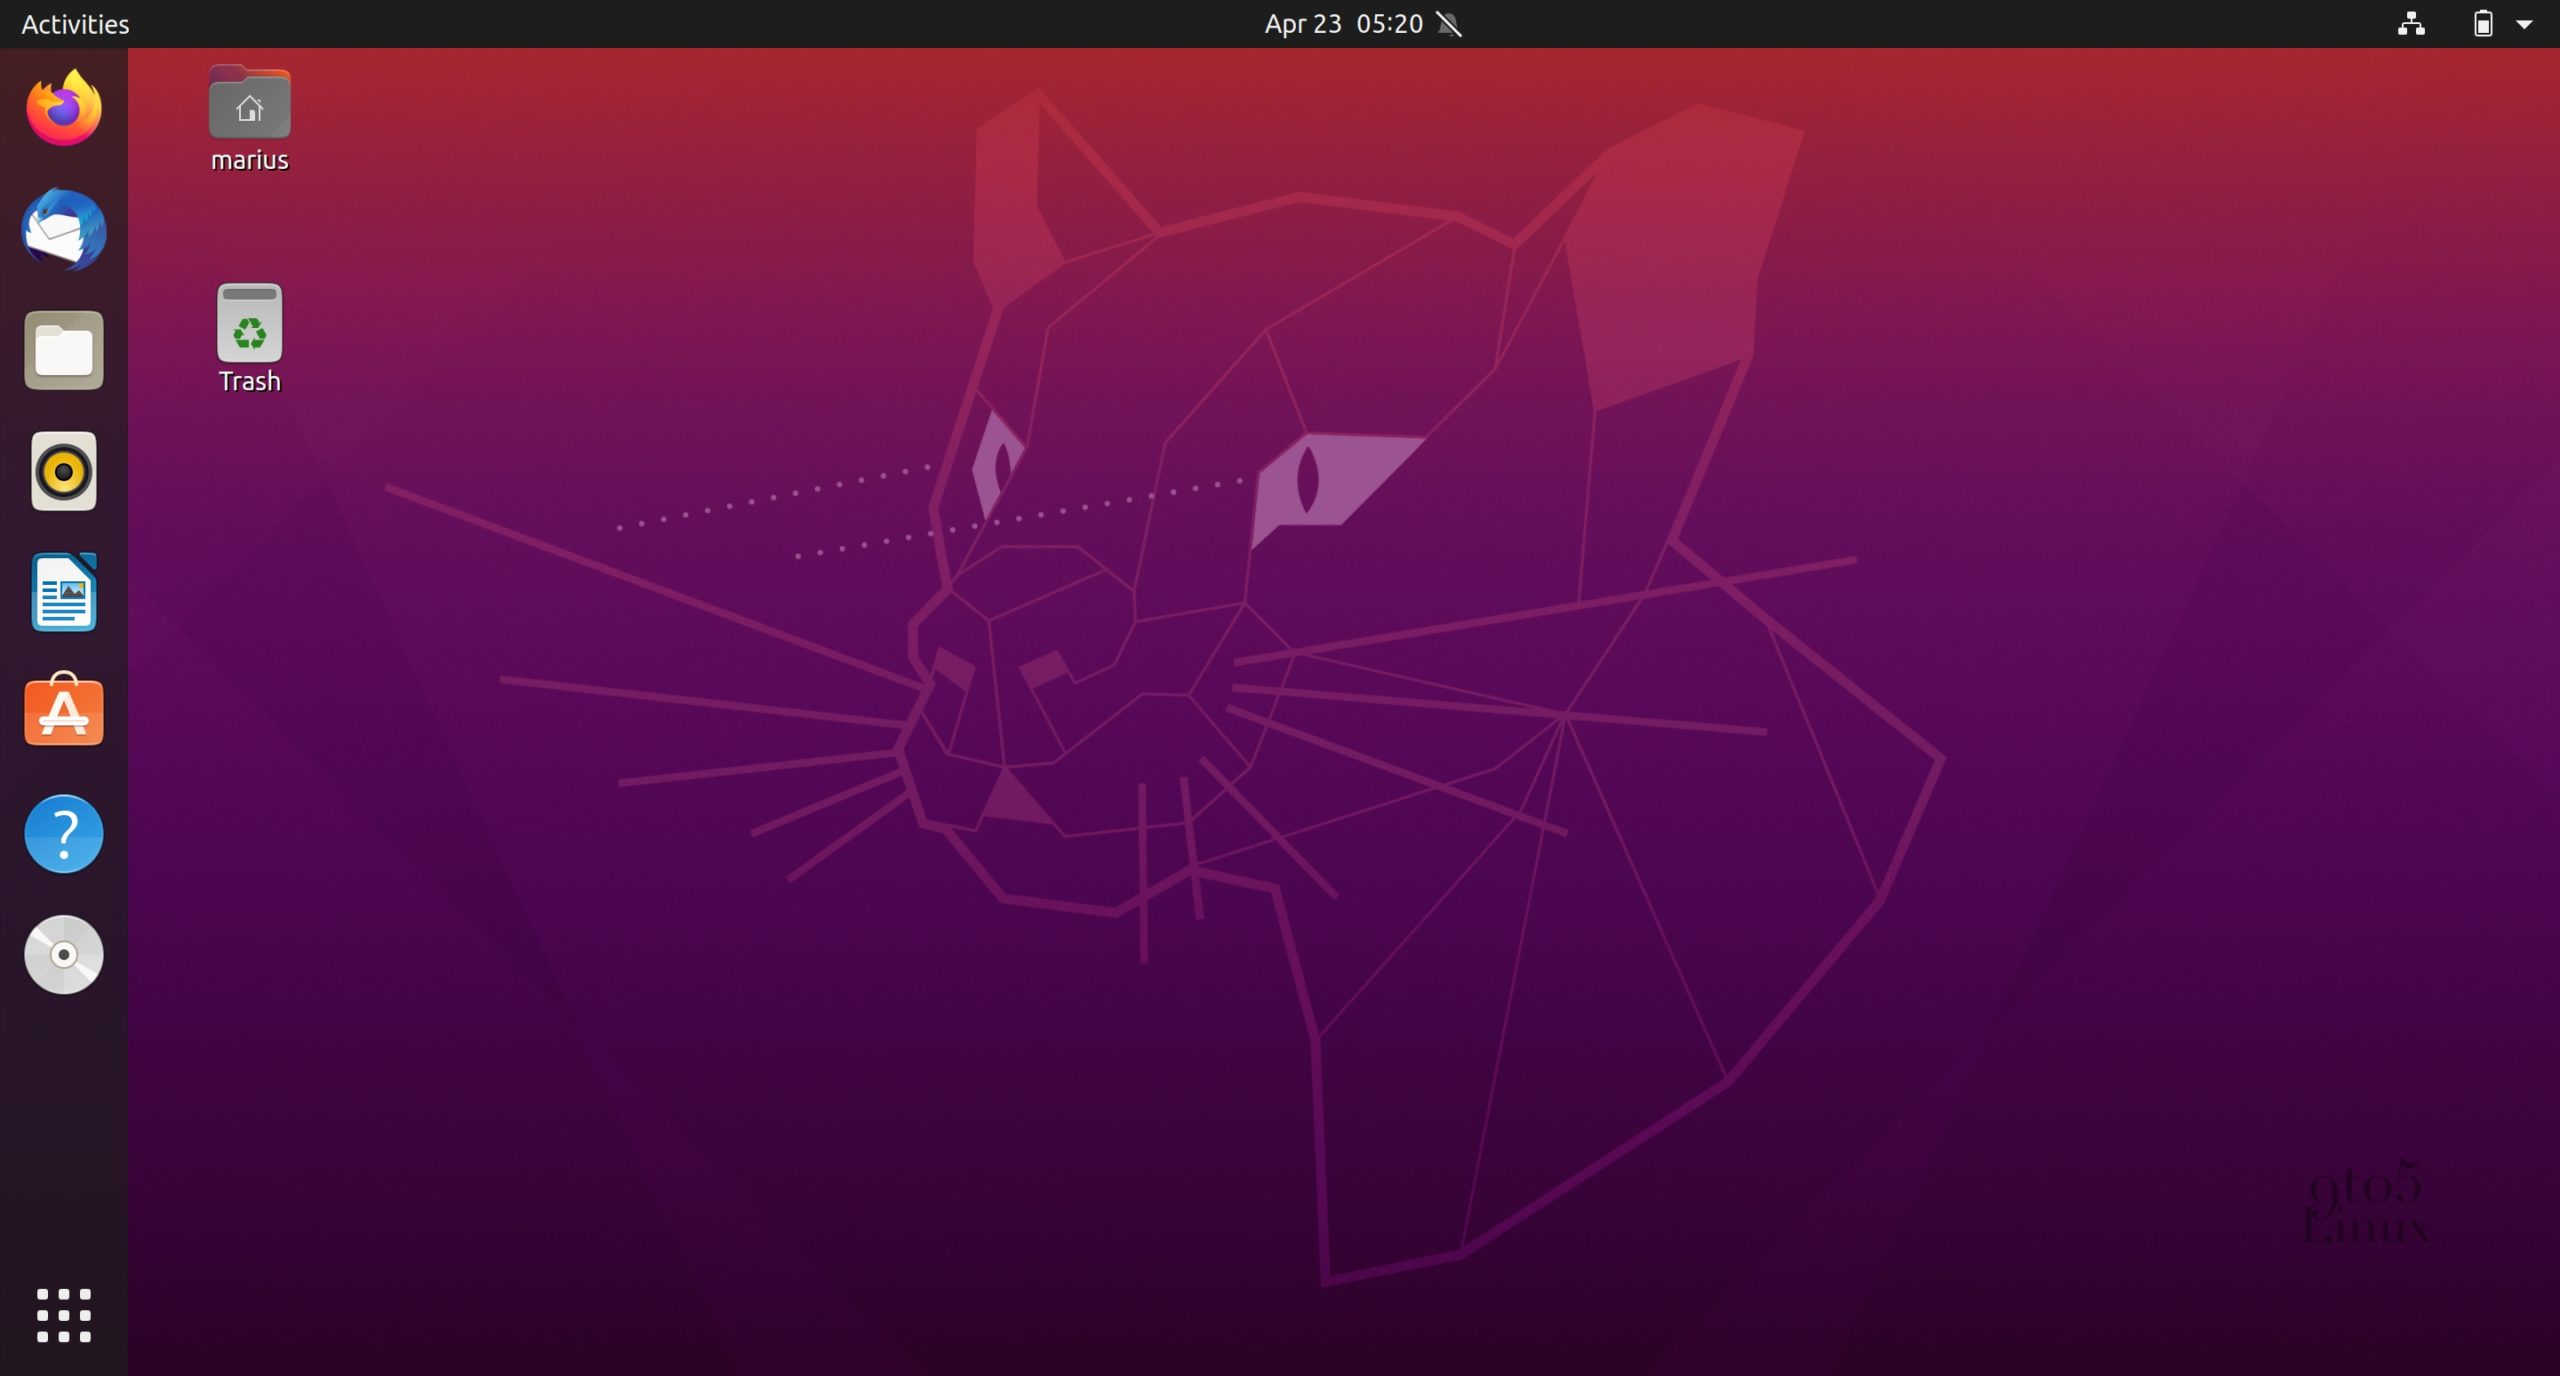 Ubuntu 20.04 LTS (Focal Fossa) Is Now Available for Download, This Is What’s New